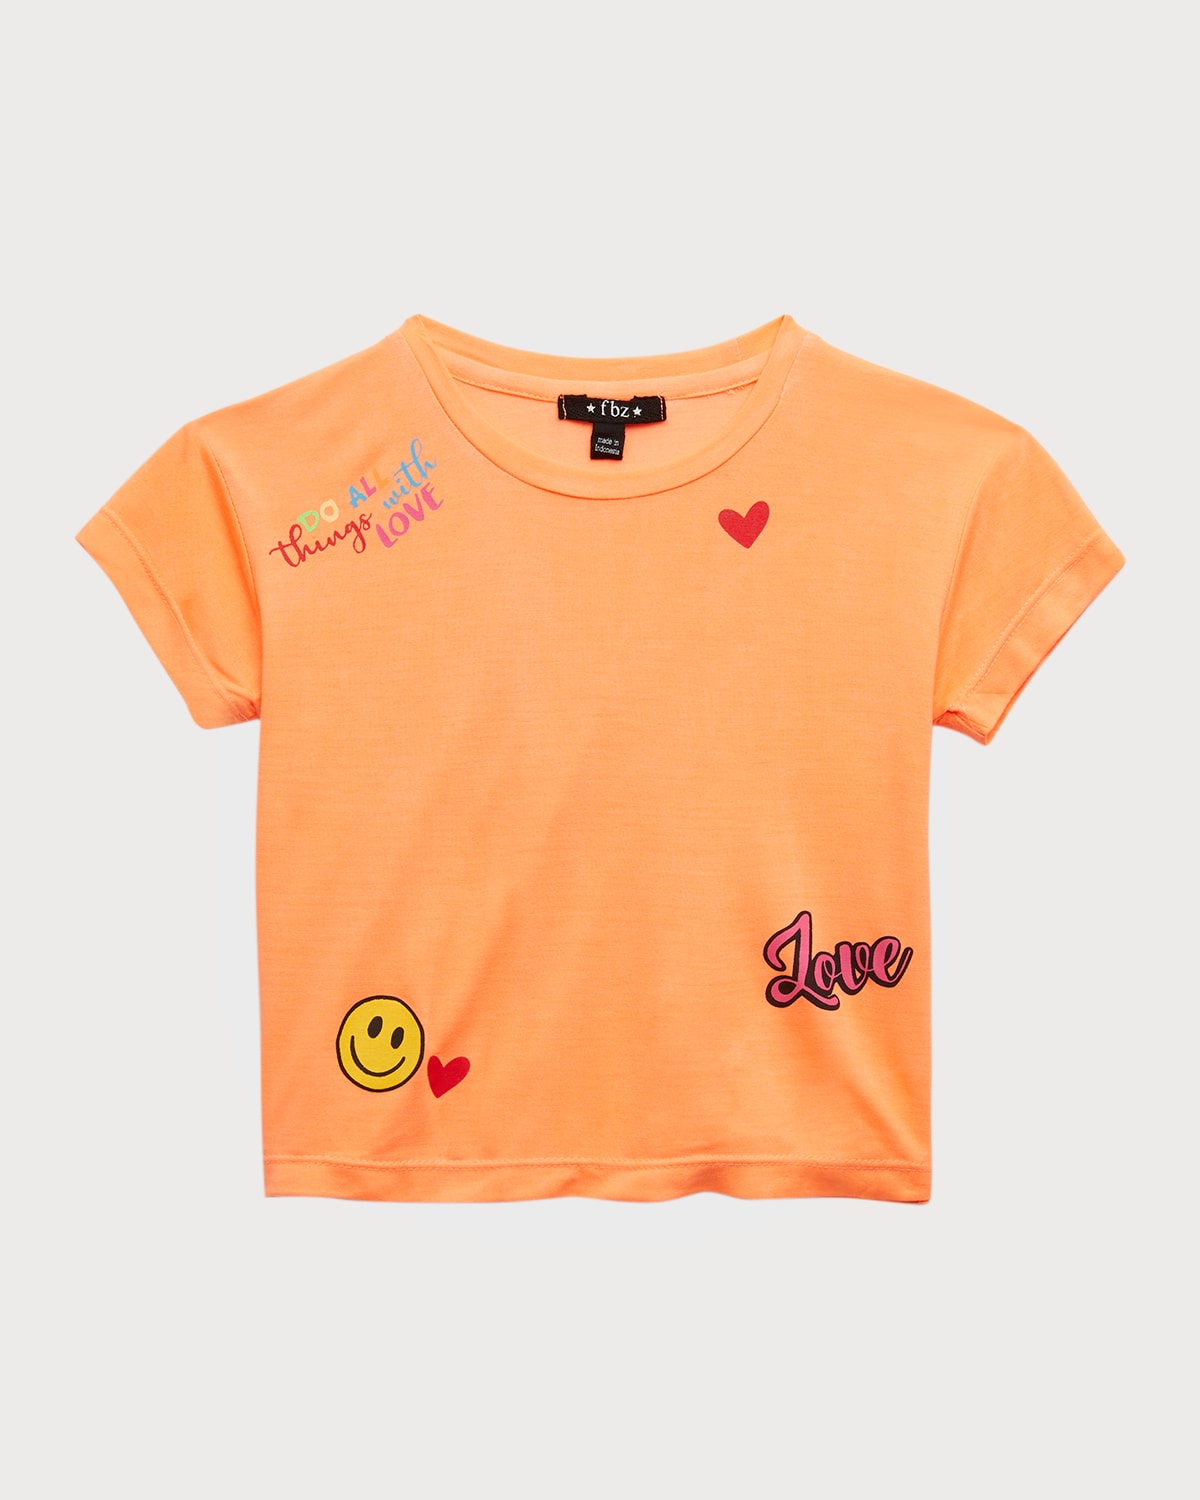 Flowers By Zoe Kids' Girl's Do All Things With Love Graphic T-shirt In Orange